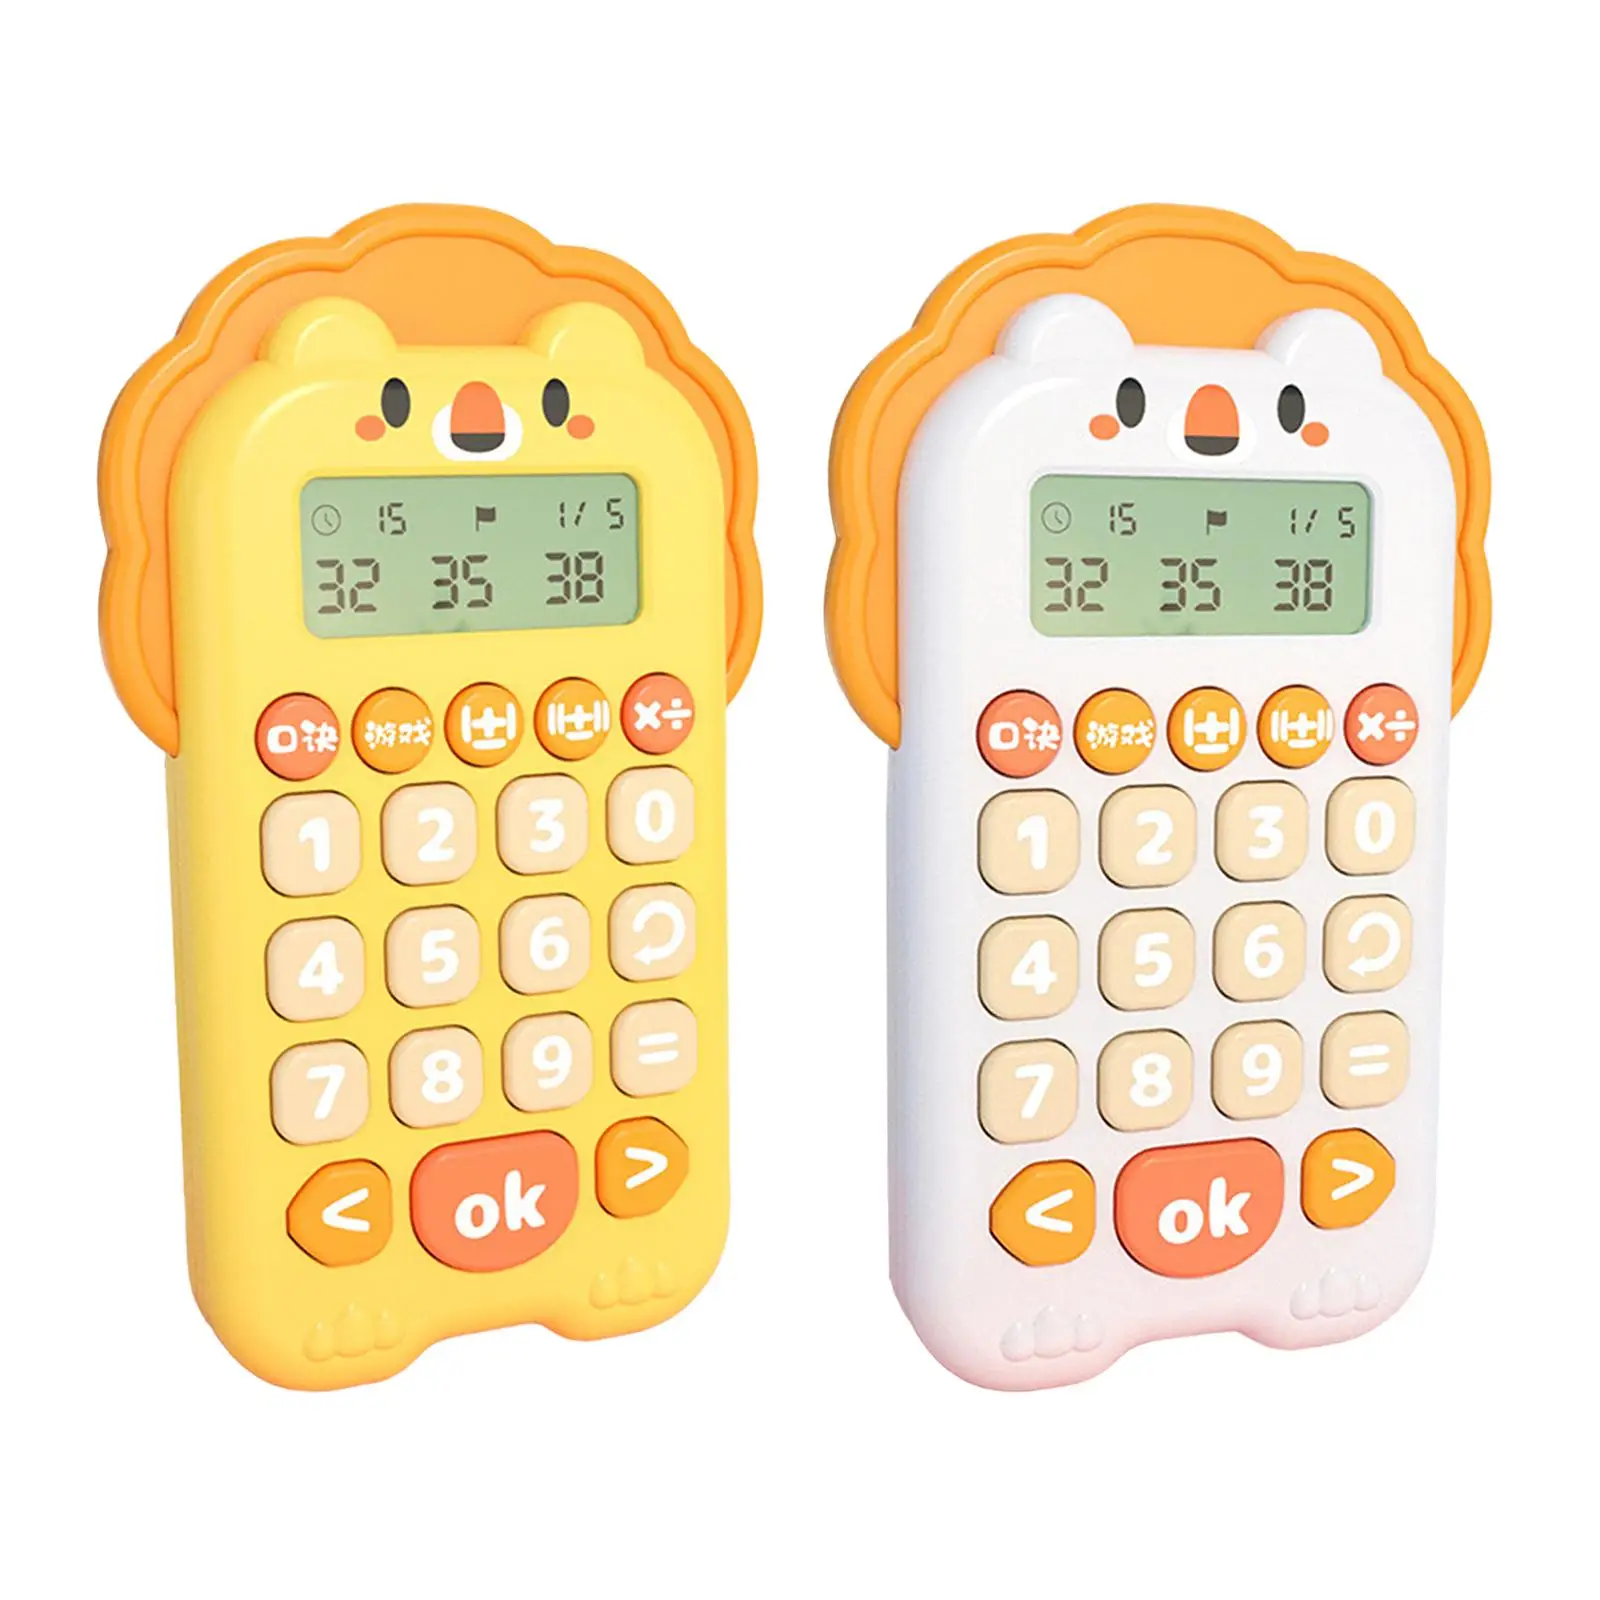 

Portable Electronic Calculator 10 Digit Display Math Educational Game Functional Calculators for Student School Boys and Girls